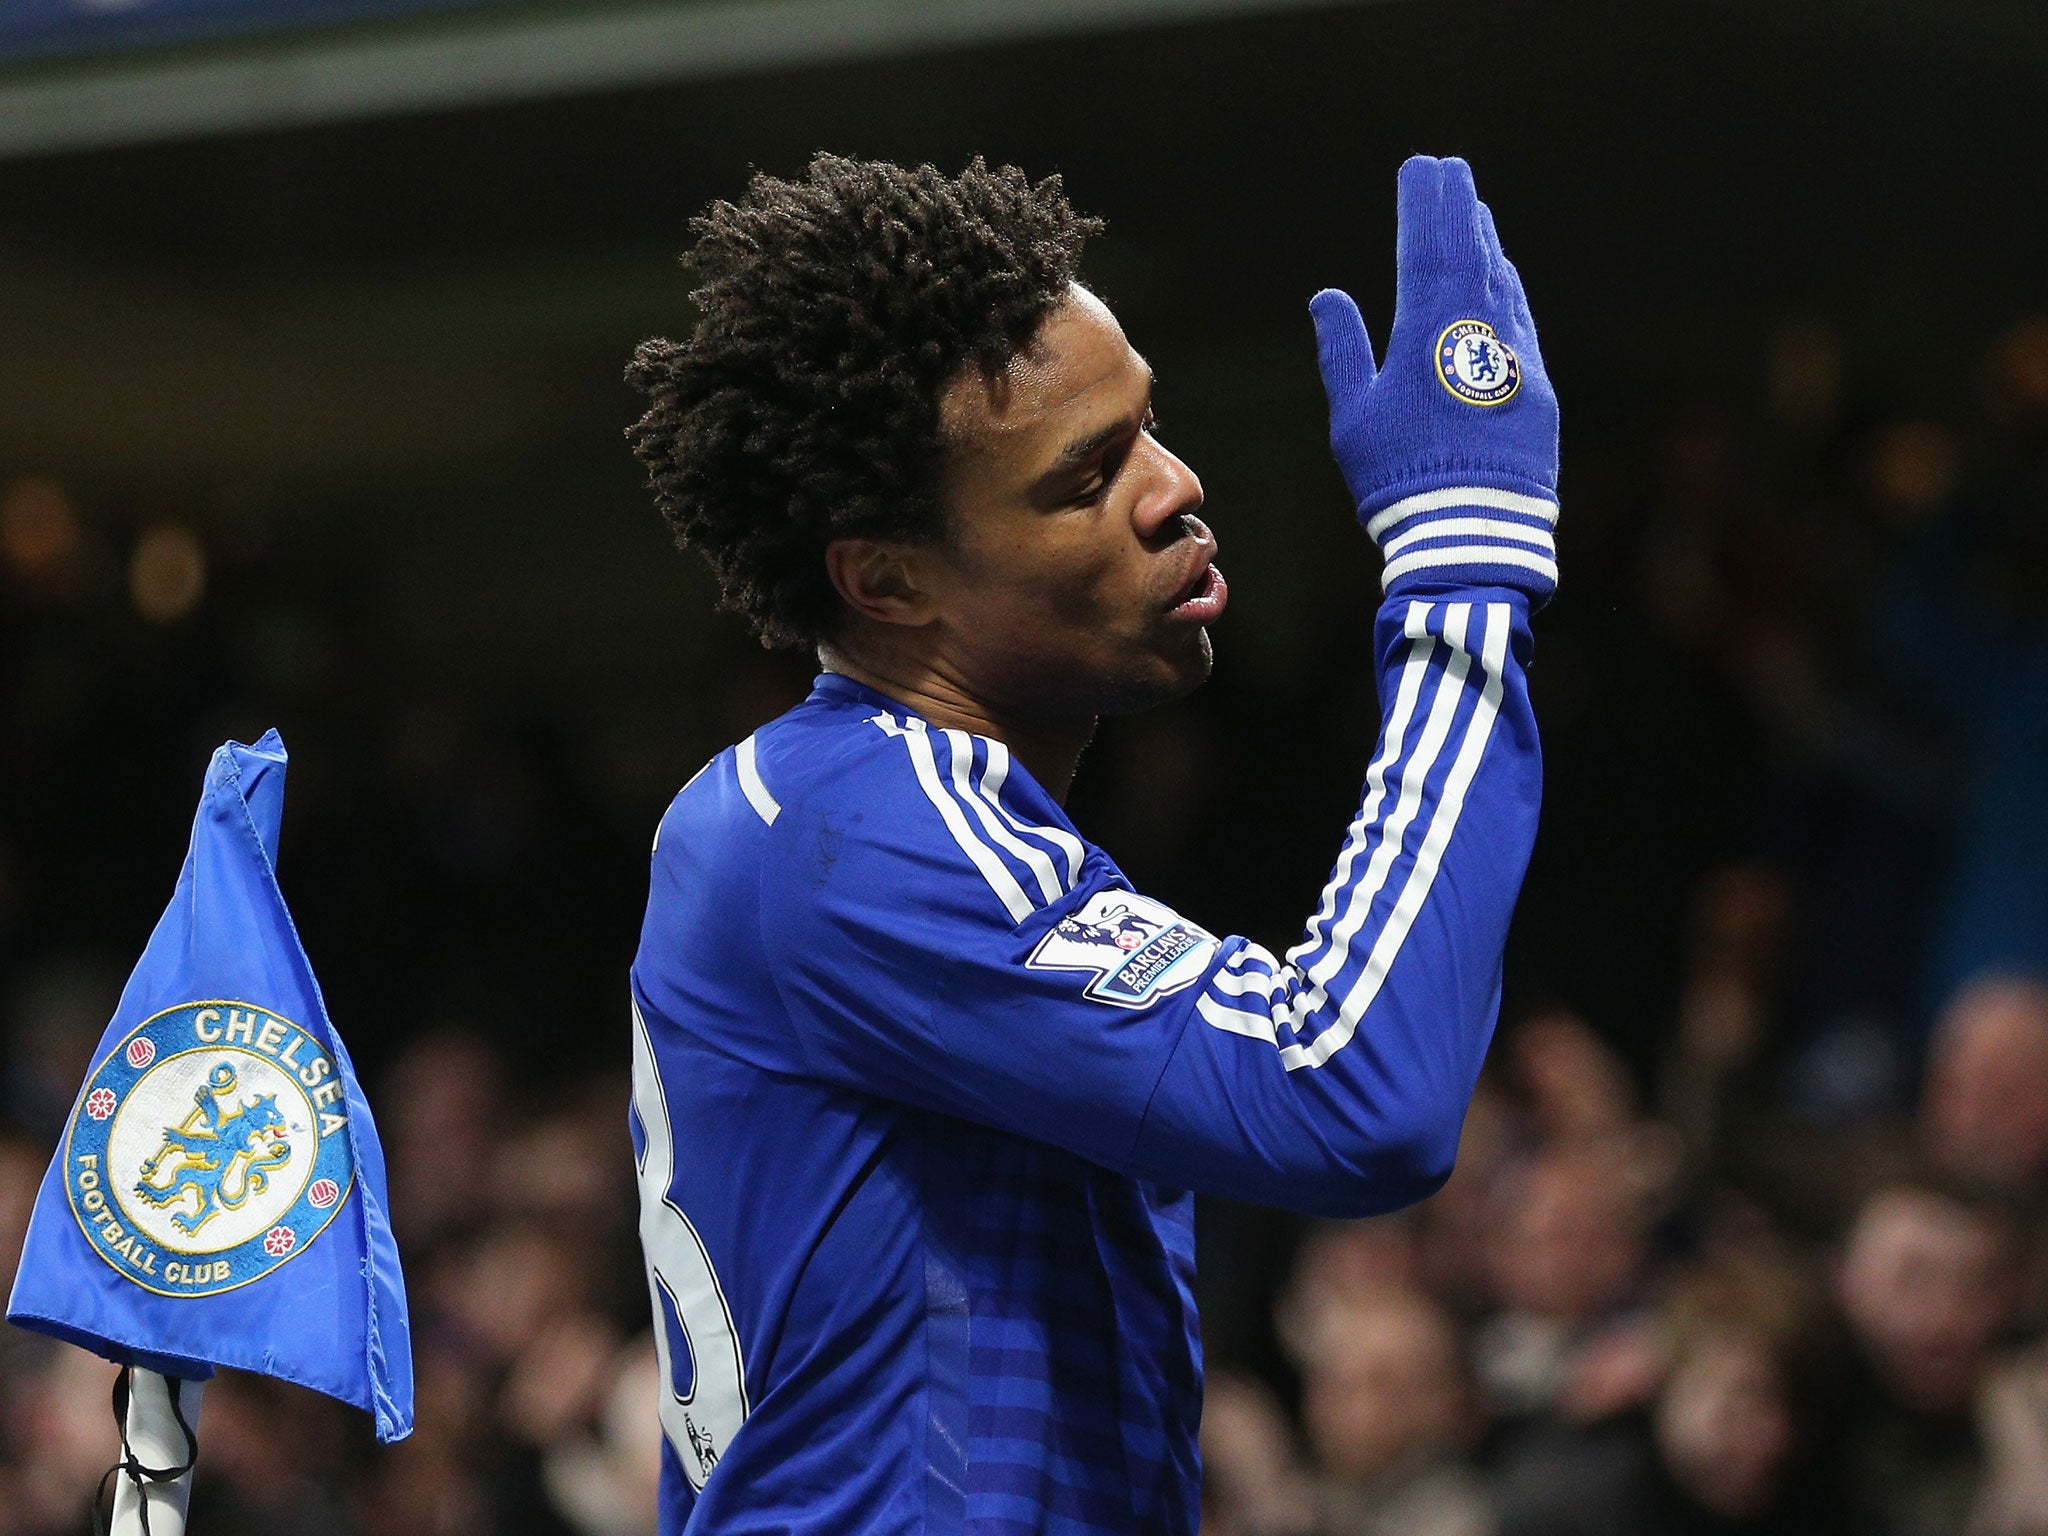 Chelsea striker Loic Remy has been linked with West Ham